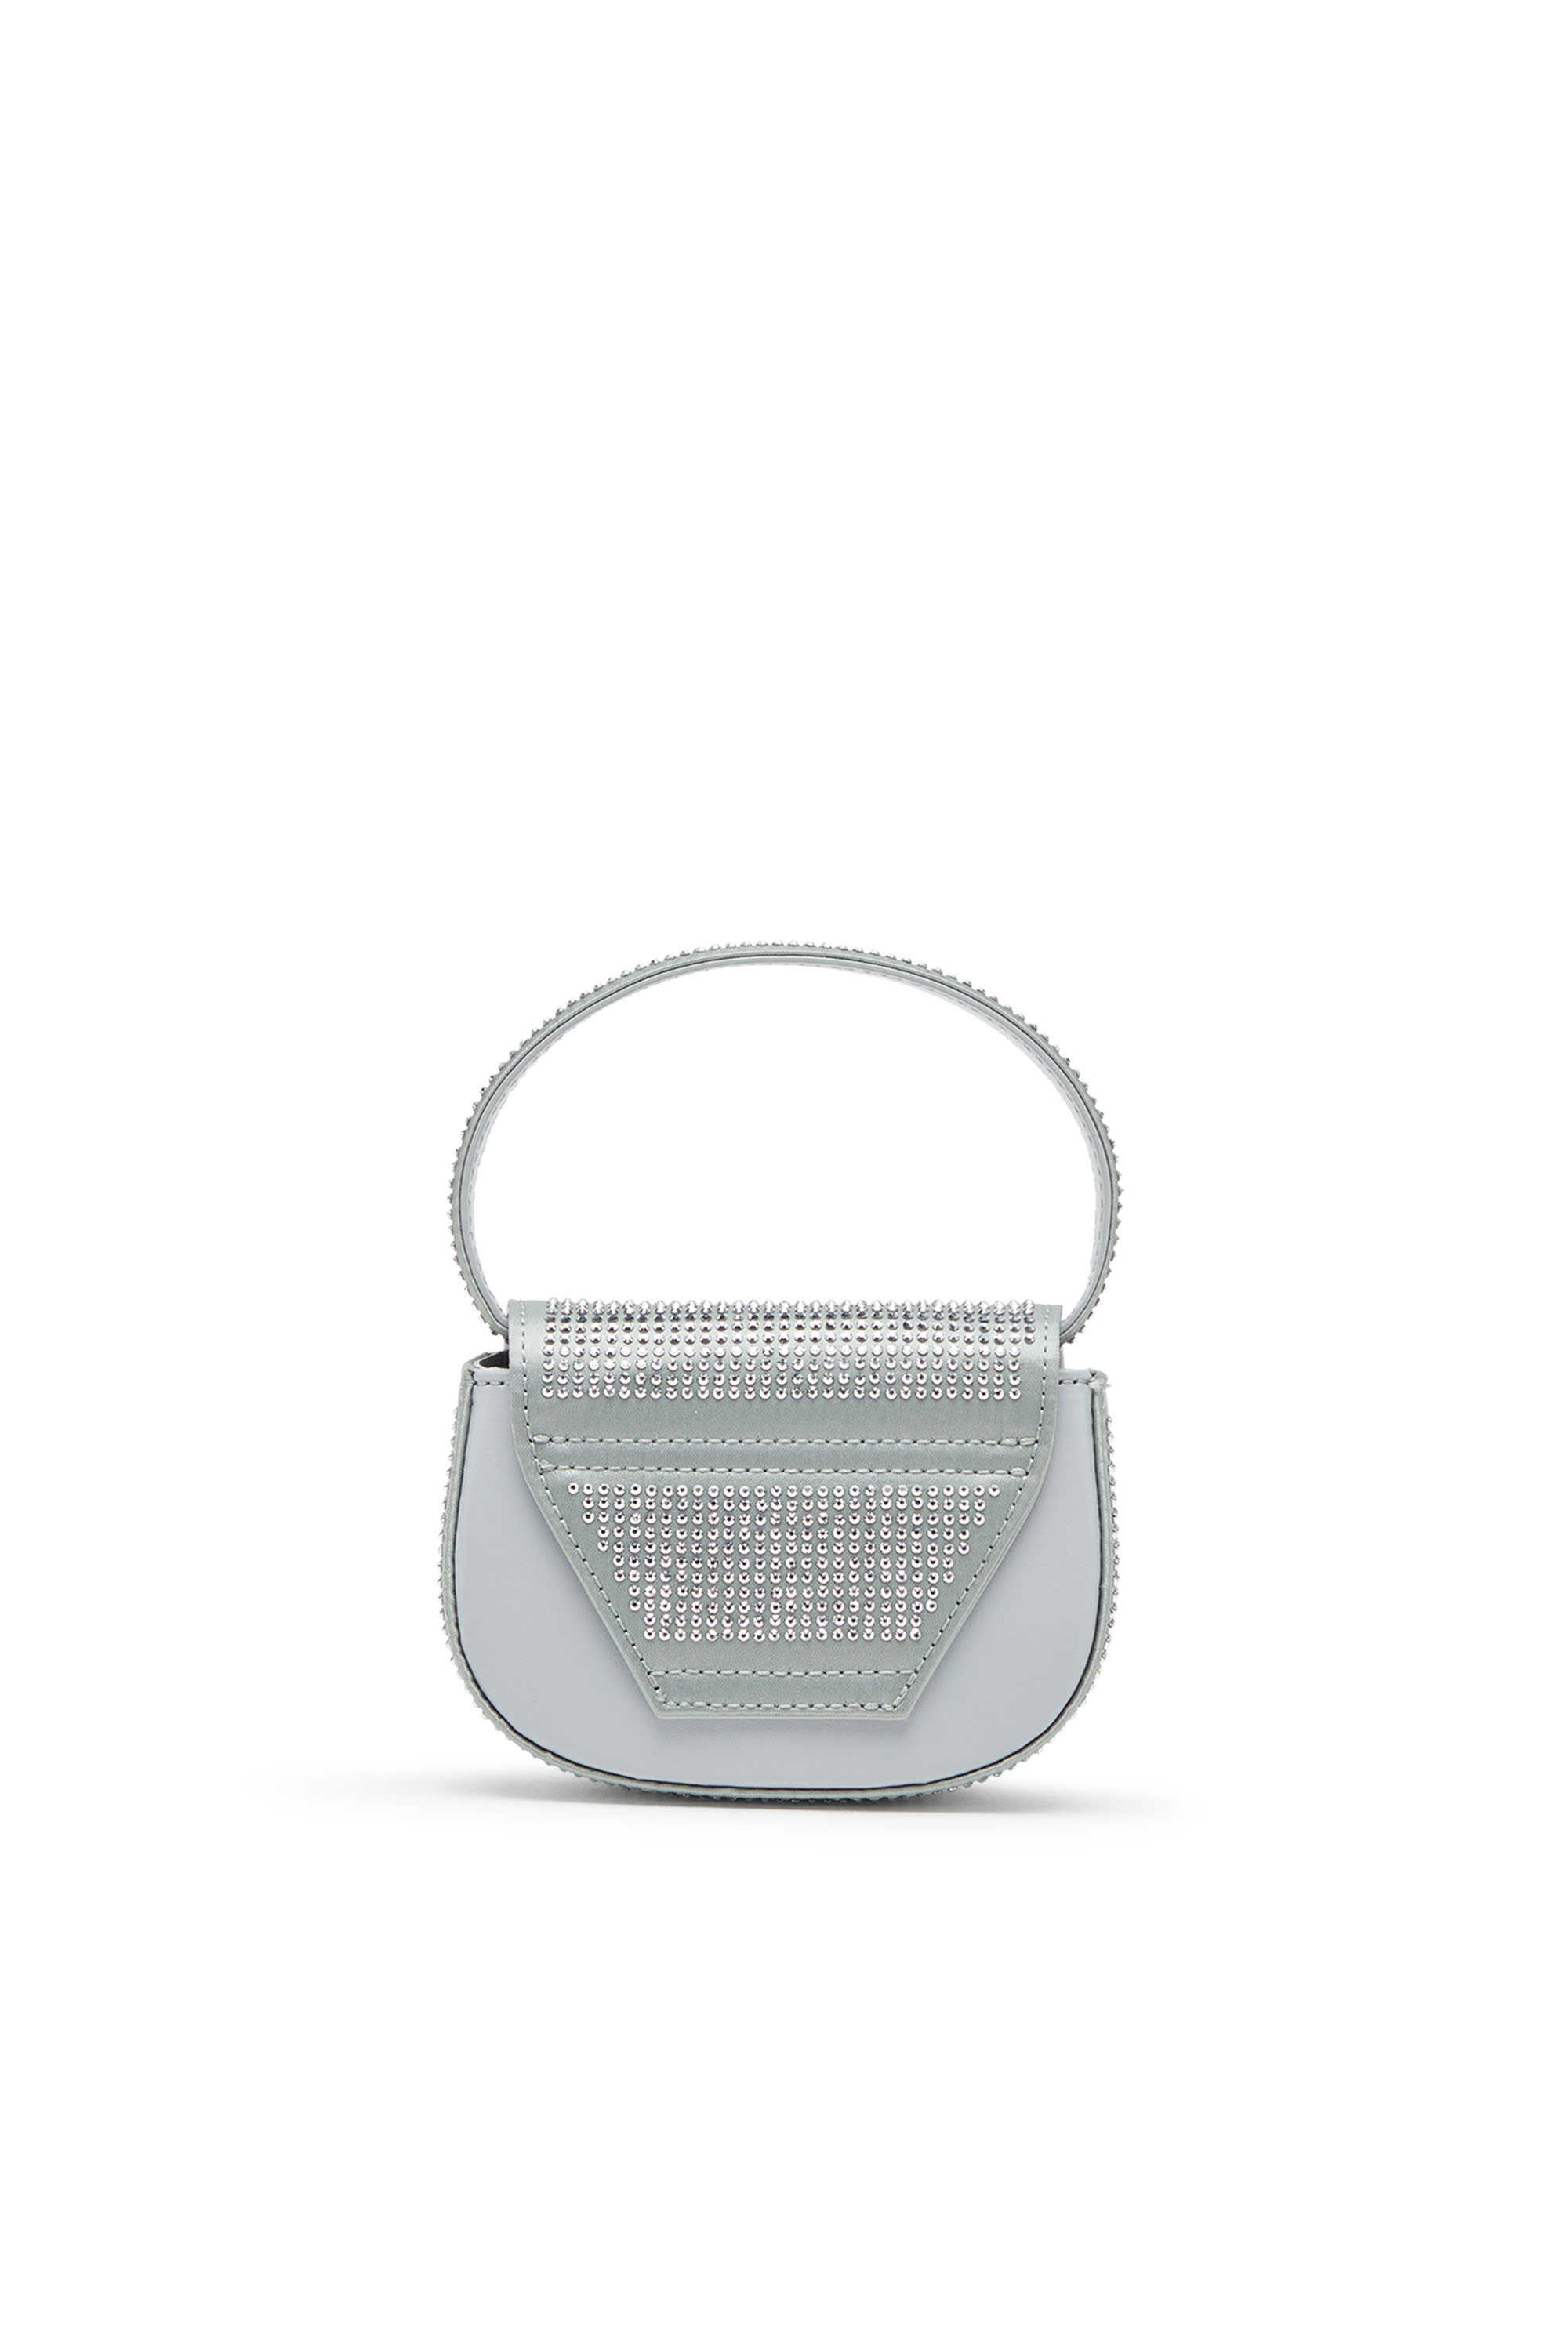 Diesel - 1DR XS, Woman 1DR XS Cross Bodybag - Iconic mini bag in crystal satin in Silver - Image 2